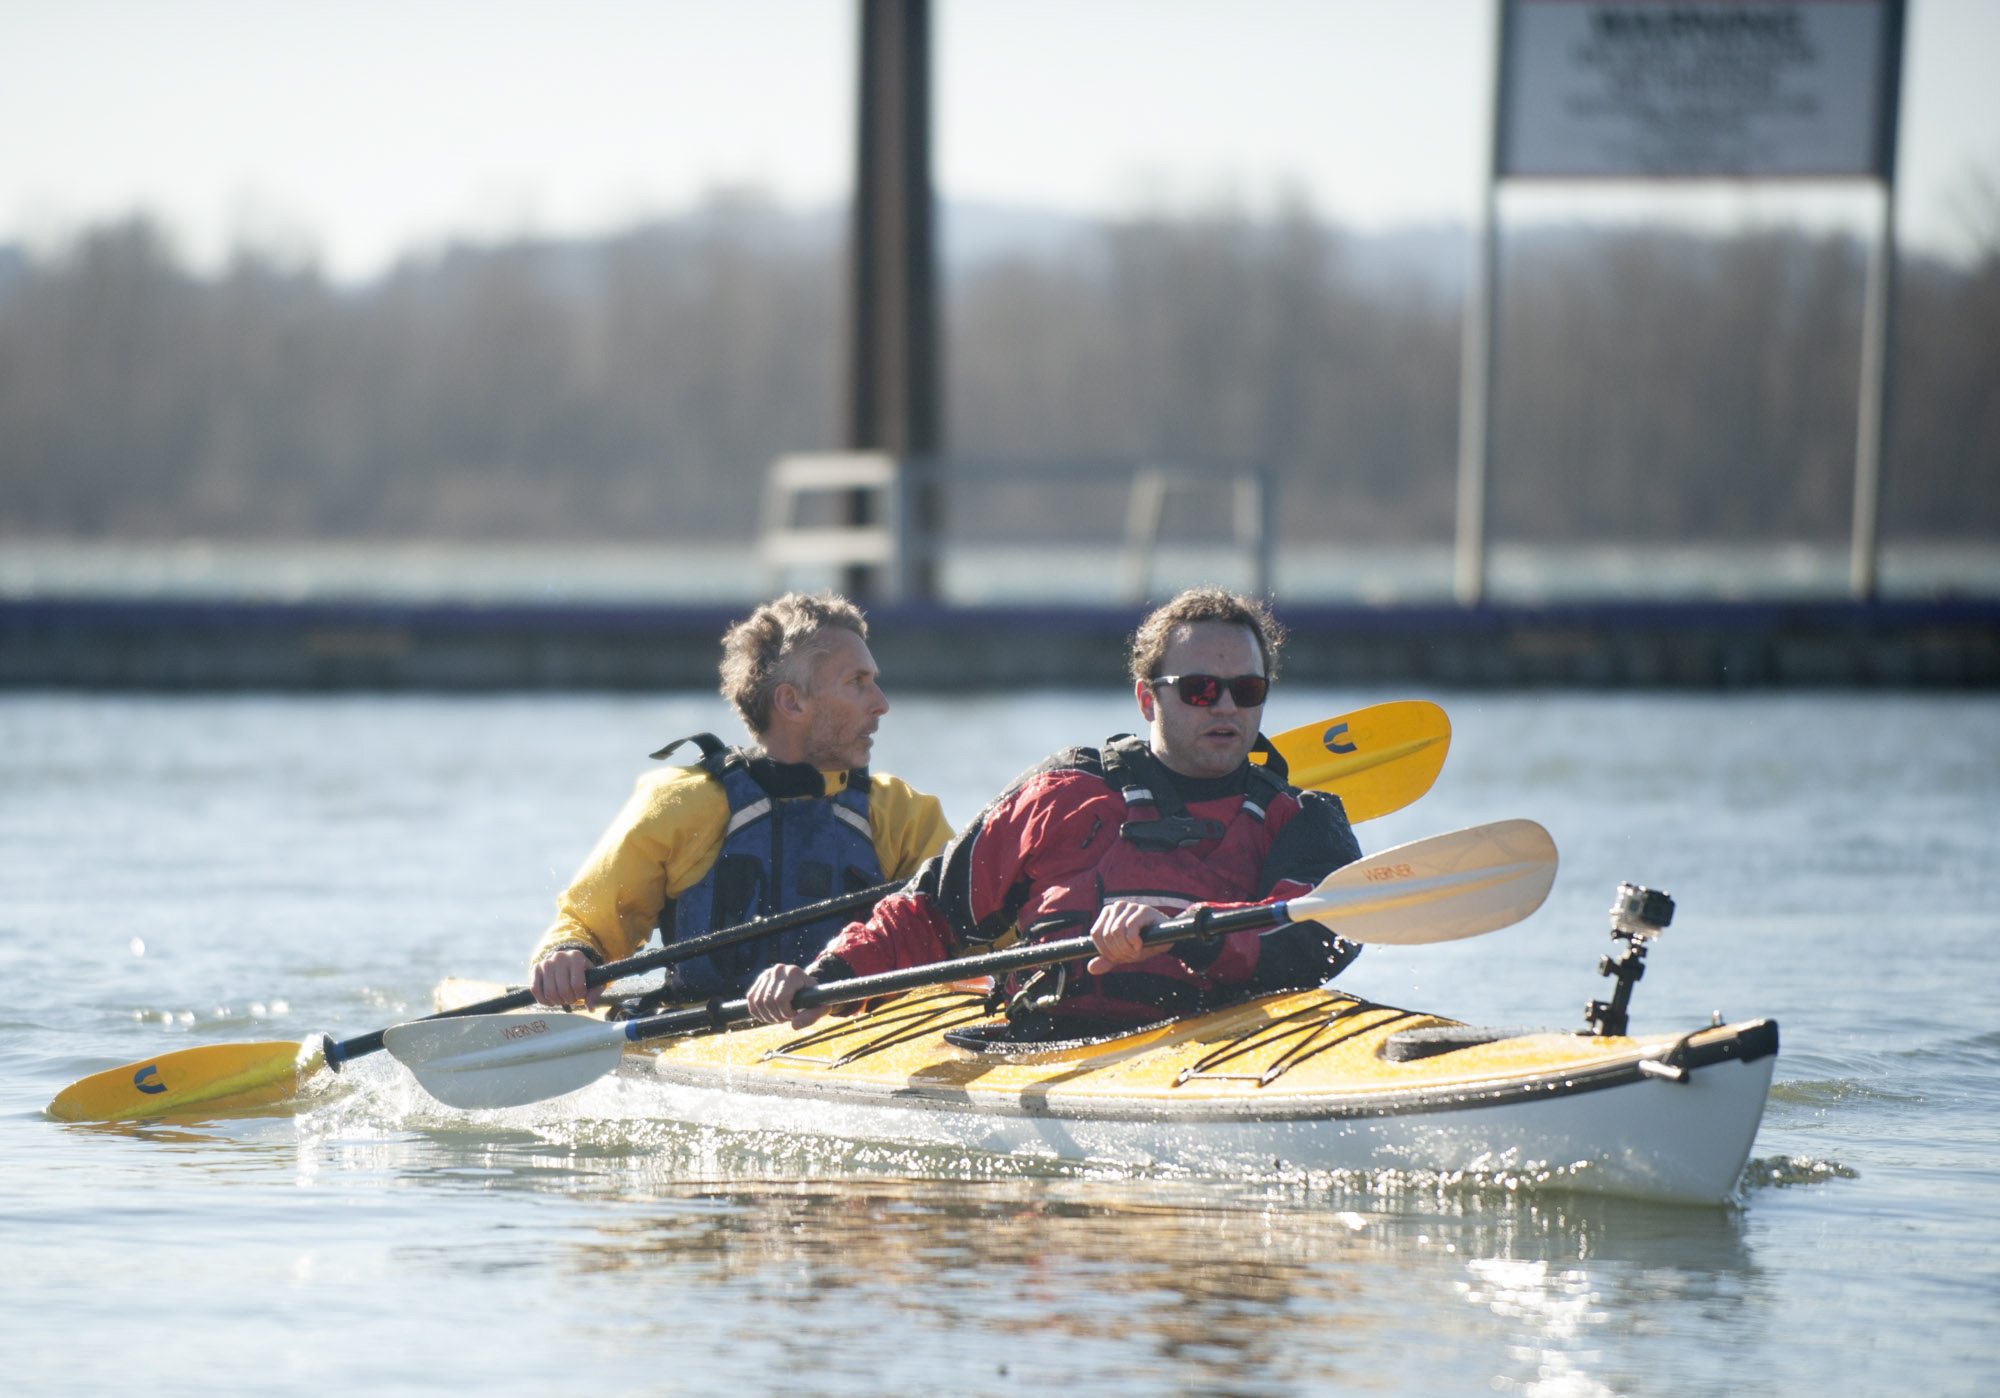 On Monday, Deputy Director of the Lower Columbia Estuary Partnership Chris Hathaway, left, and Columbian reporter Dameon Pesanti kayak at the Port of Camas-Washougal, a stop on the Lower Columbia River Water Trail.